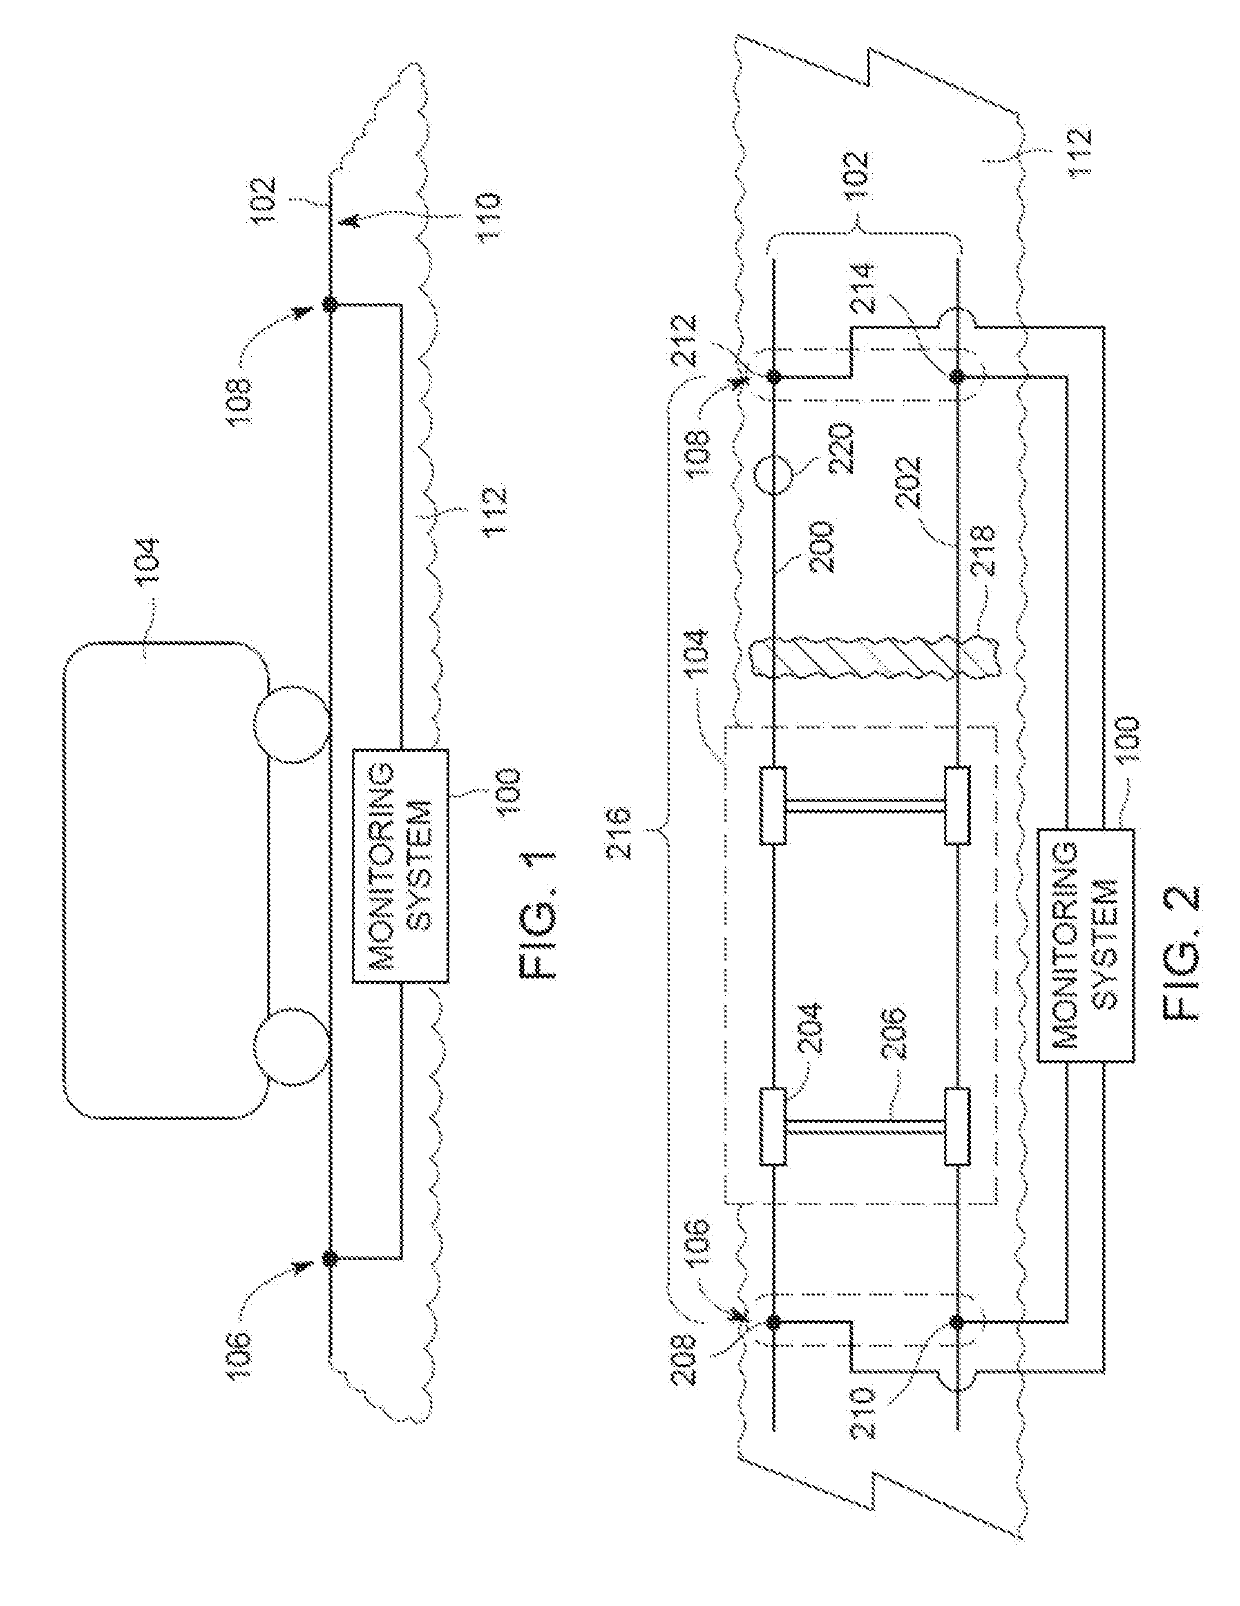 Route monitoring system and method